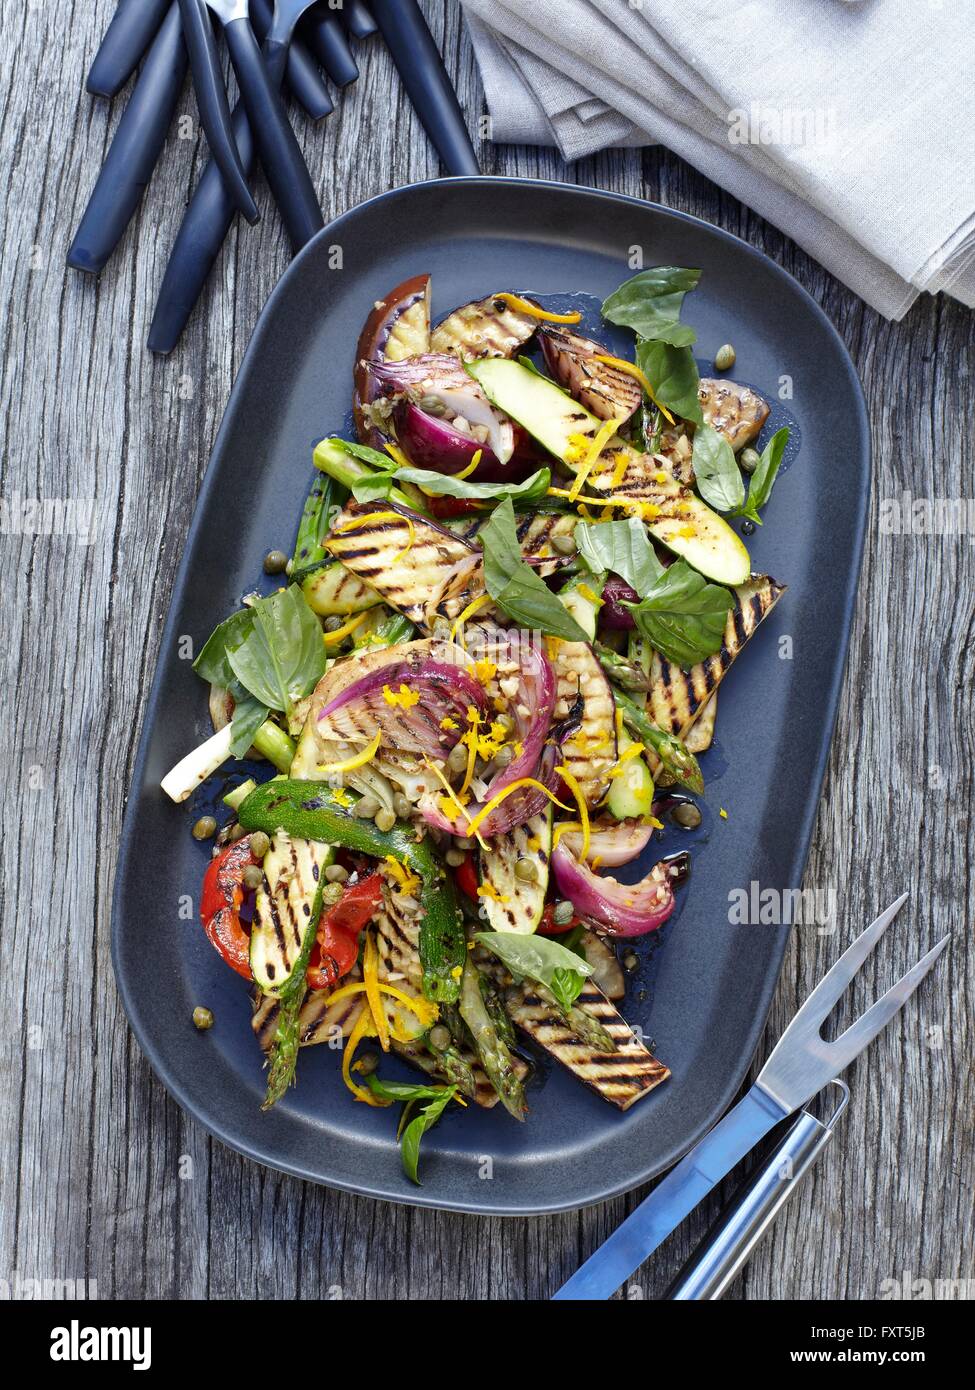 Overhead view of vegetable salad on barbecue griddle pan Stock Photo